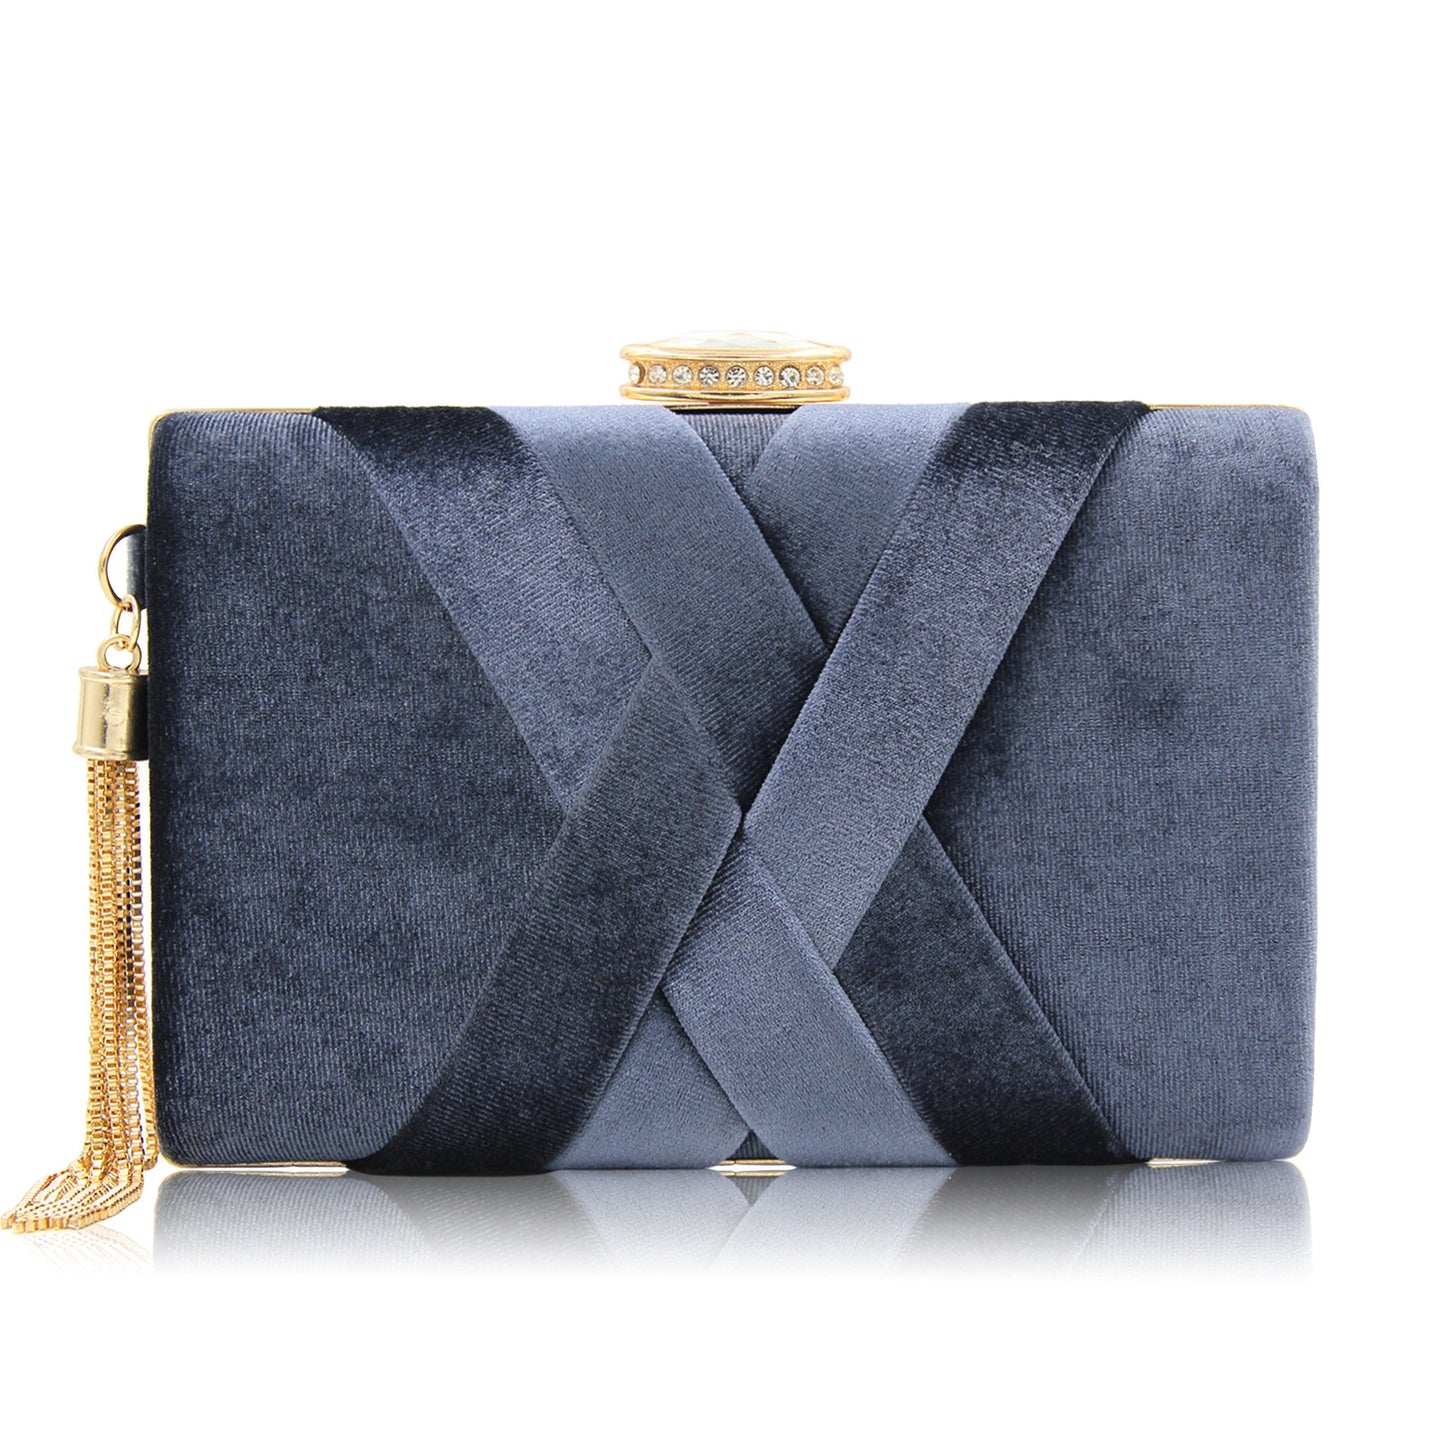 Milisente 2021 New Arrival Women Clutch Bags Top Quality Suede Clutches Purses Ladies Tassels Evening Bag Wedding Clutches